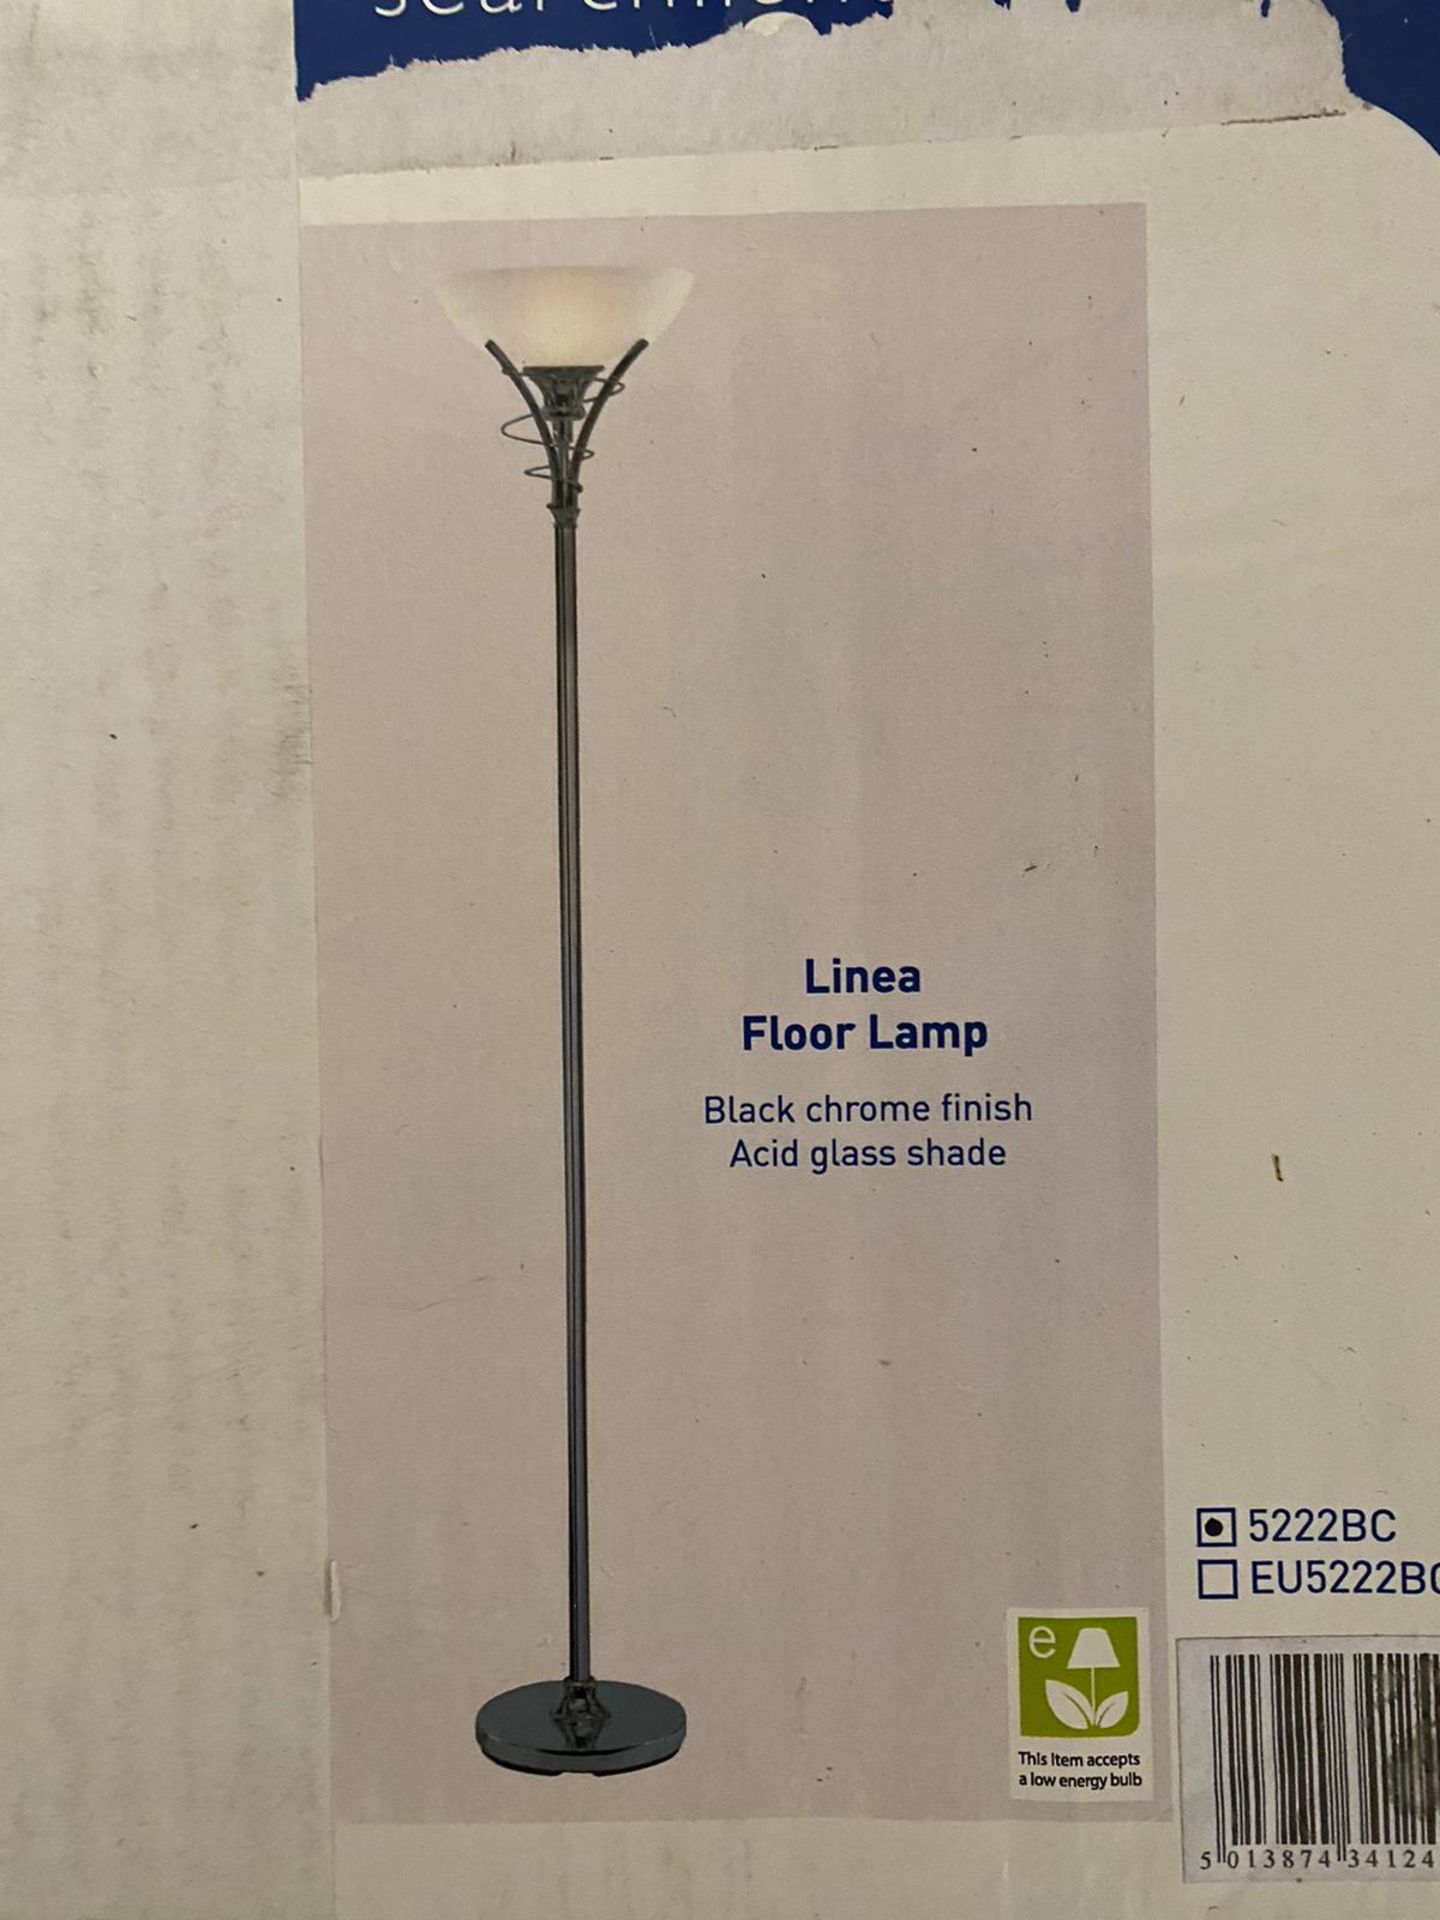 1 x Searchlight Linea Floor Lamp in black chrome - Ref: 5222BC - New and Boxed - RRP: £100.00 - Image 2 of 4